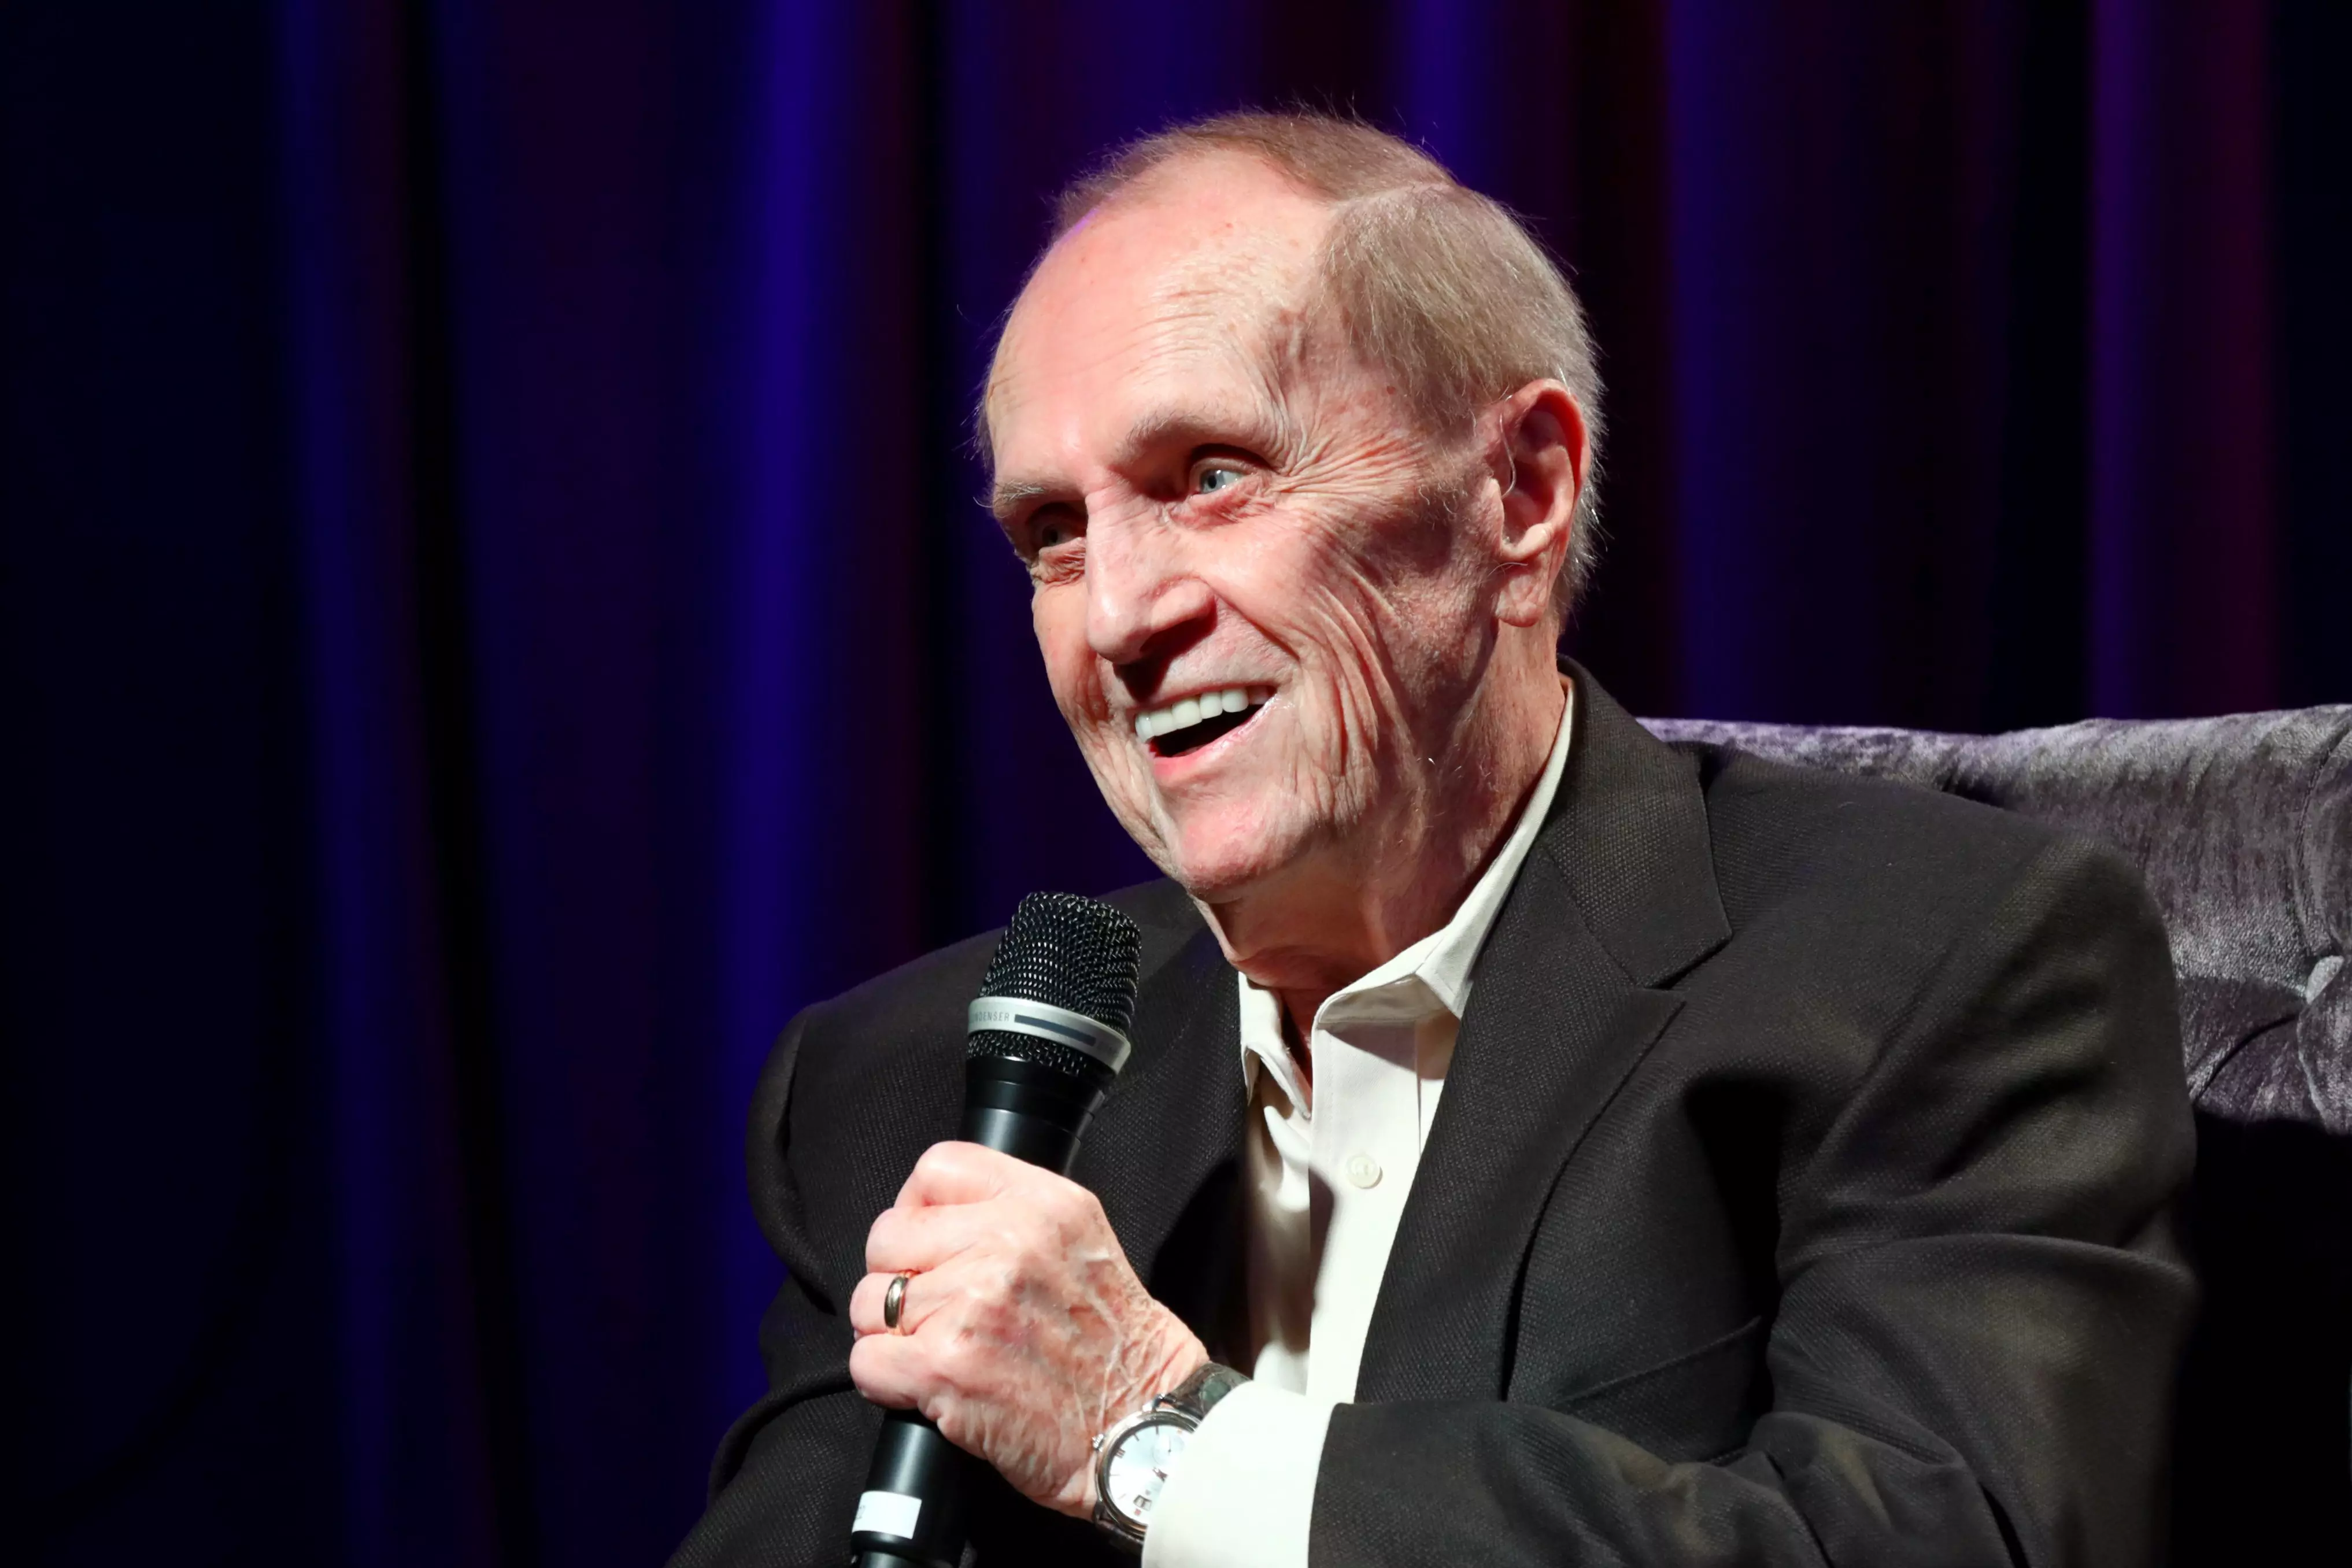 Remembering Bob Newhart, The Comic Who Made GRAMMY History With His Debut Album